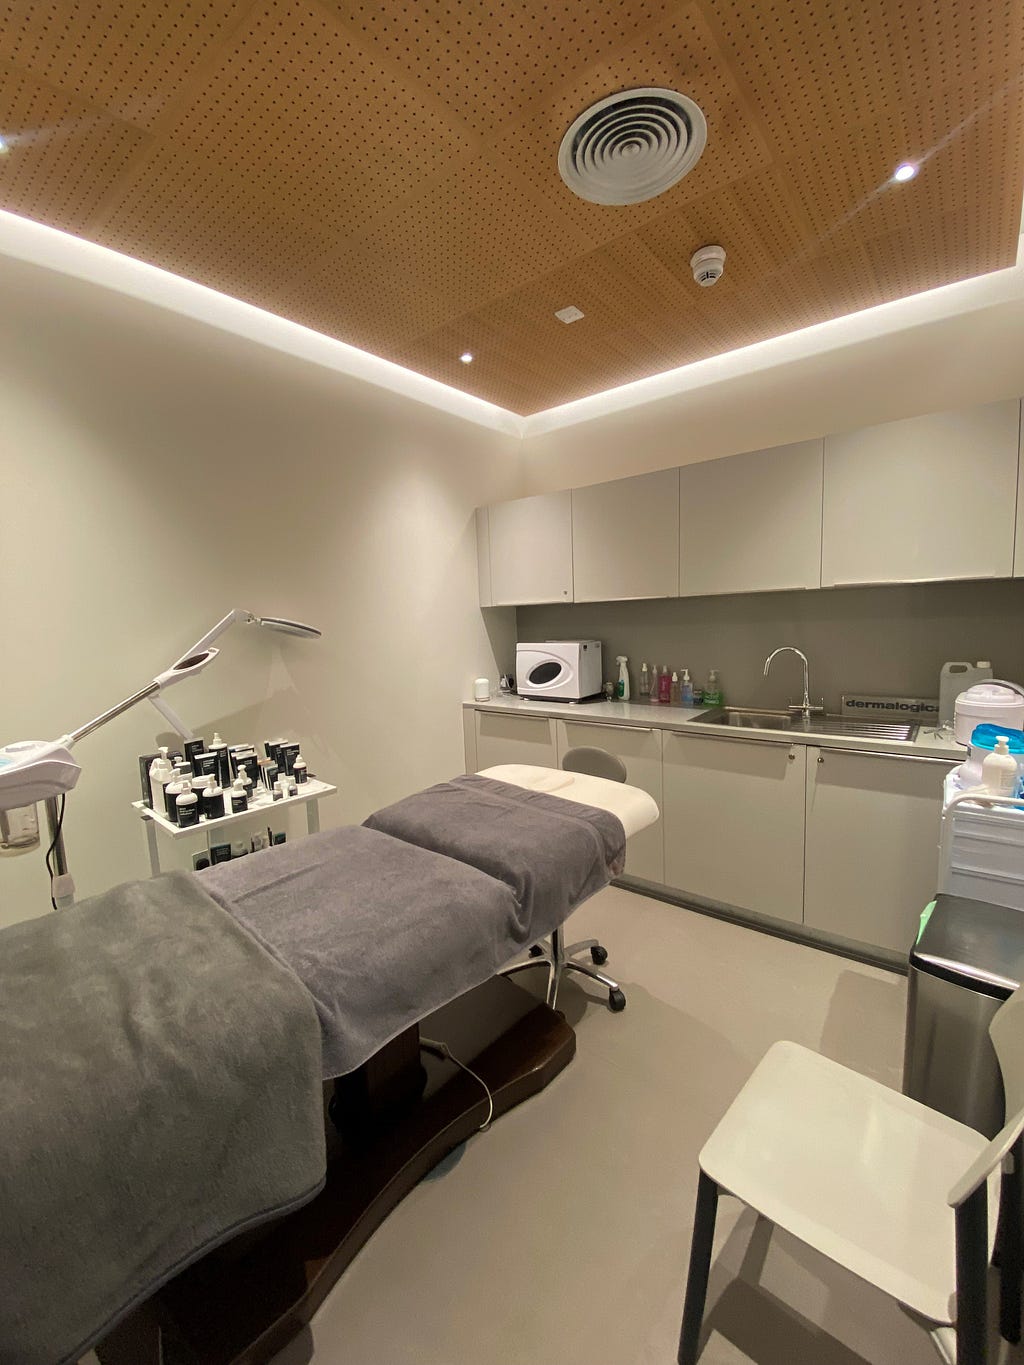 A beauty treatment room with a bed in the middle, and skin care treatments next to the bed.